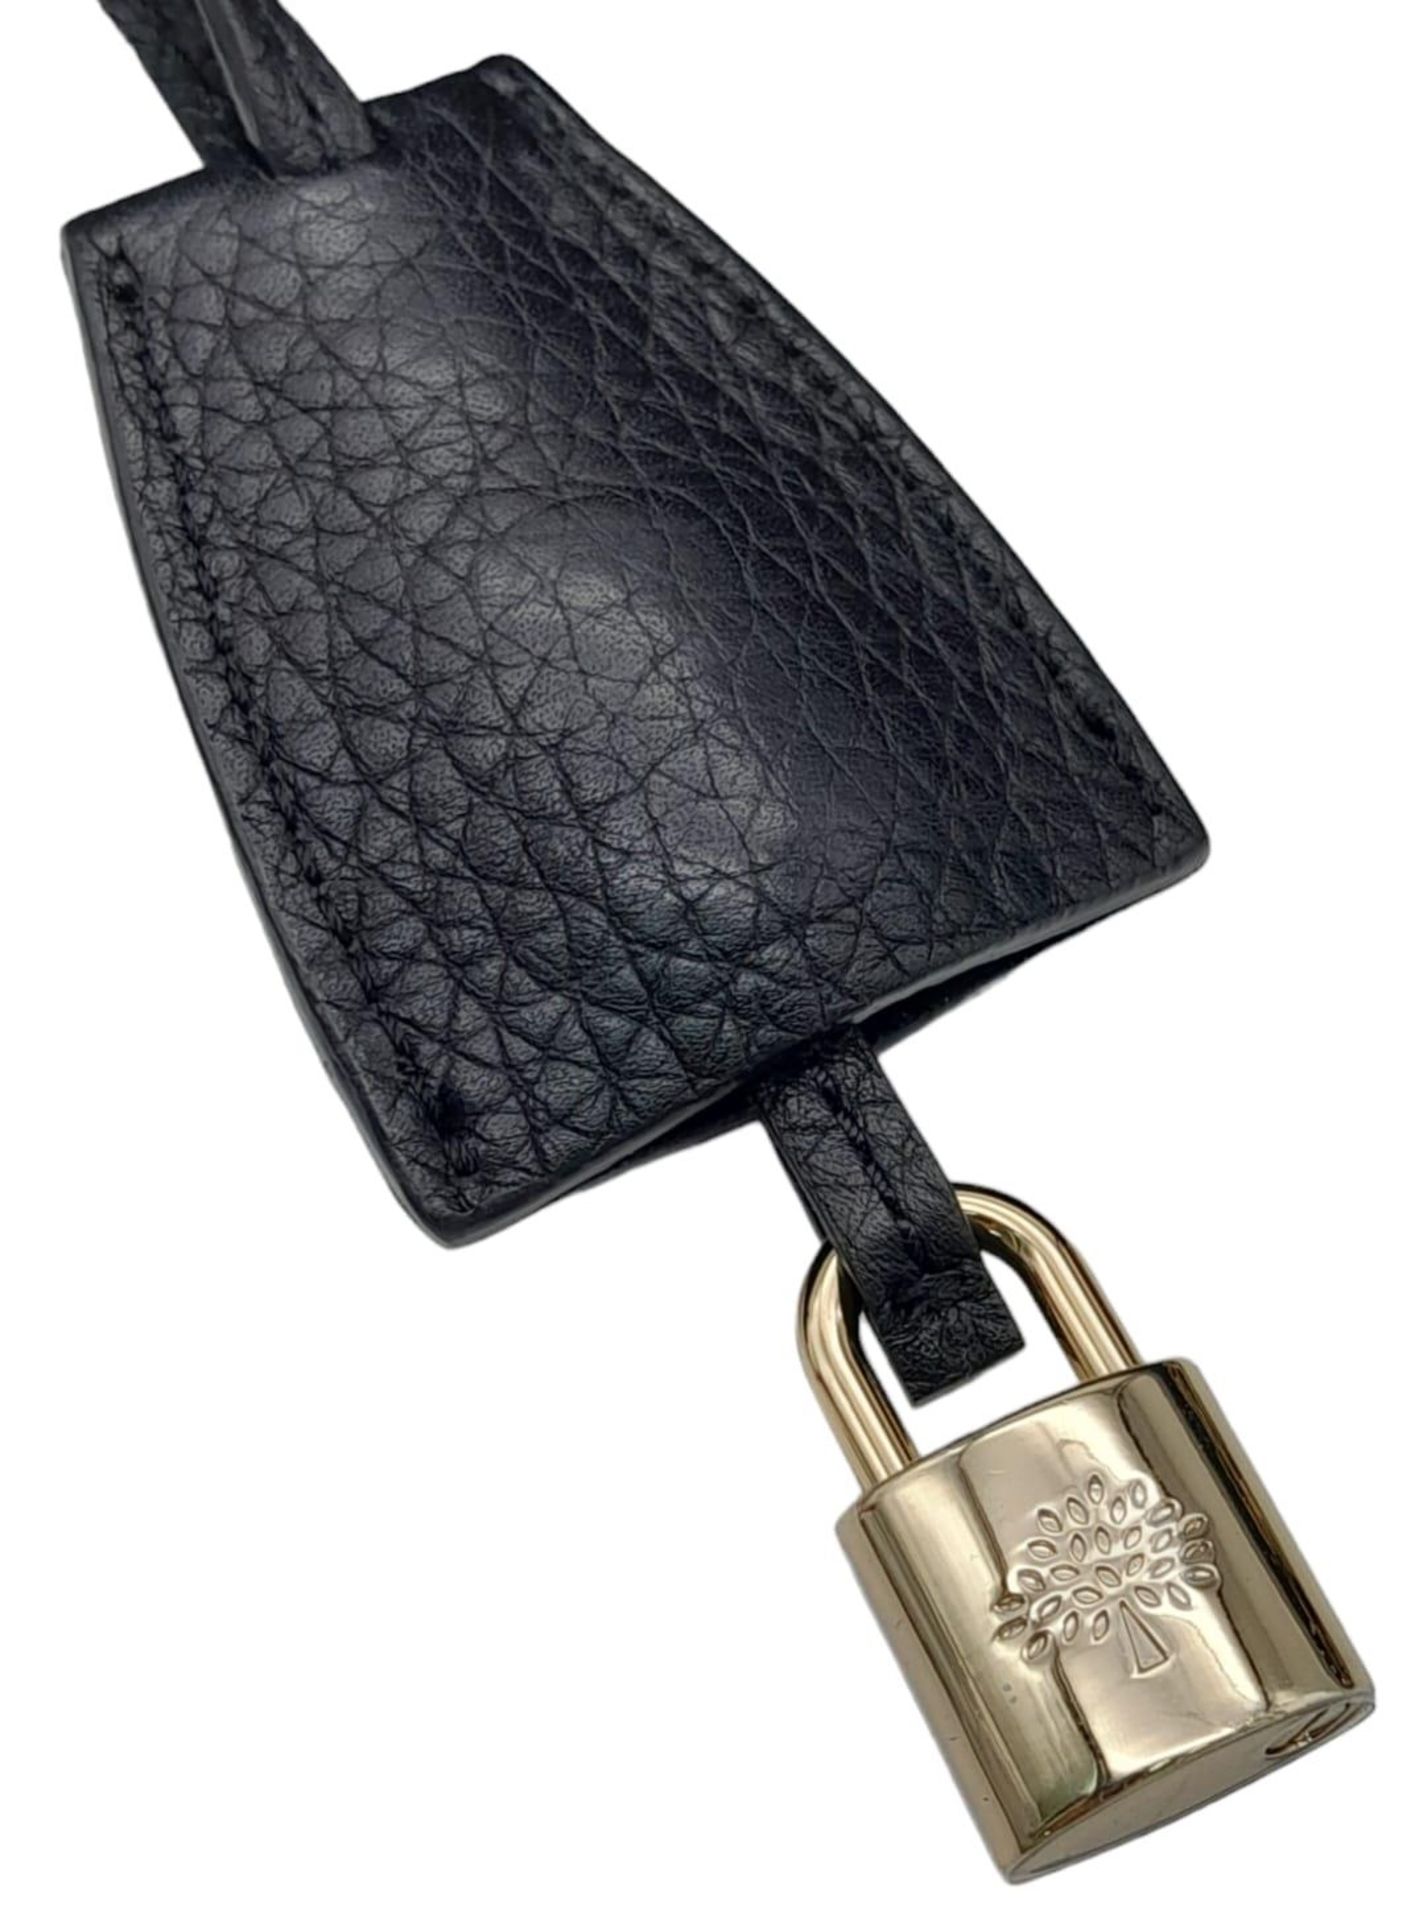 A Black Mulberry Lily Bag. With a Classic Grain Leather, Flap Over Design, Signature Postman Style - Bild 6 aus 10